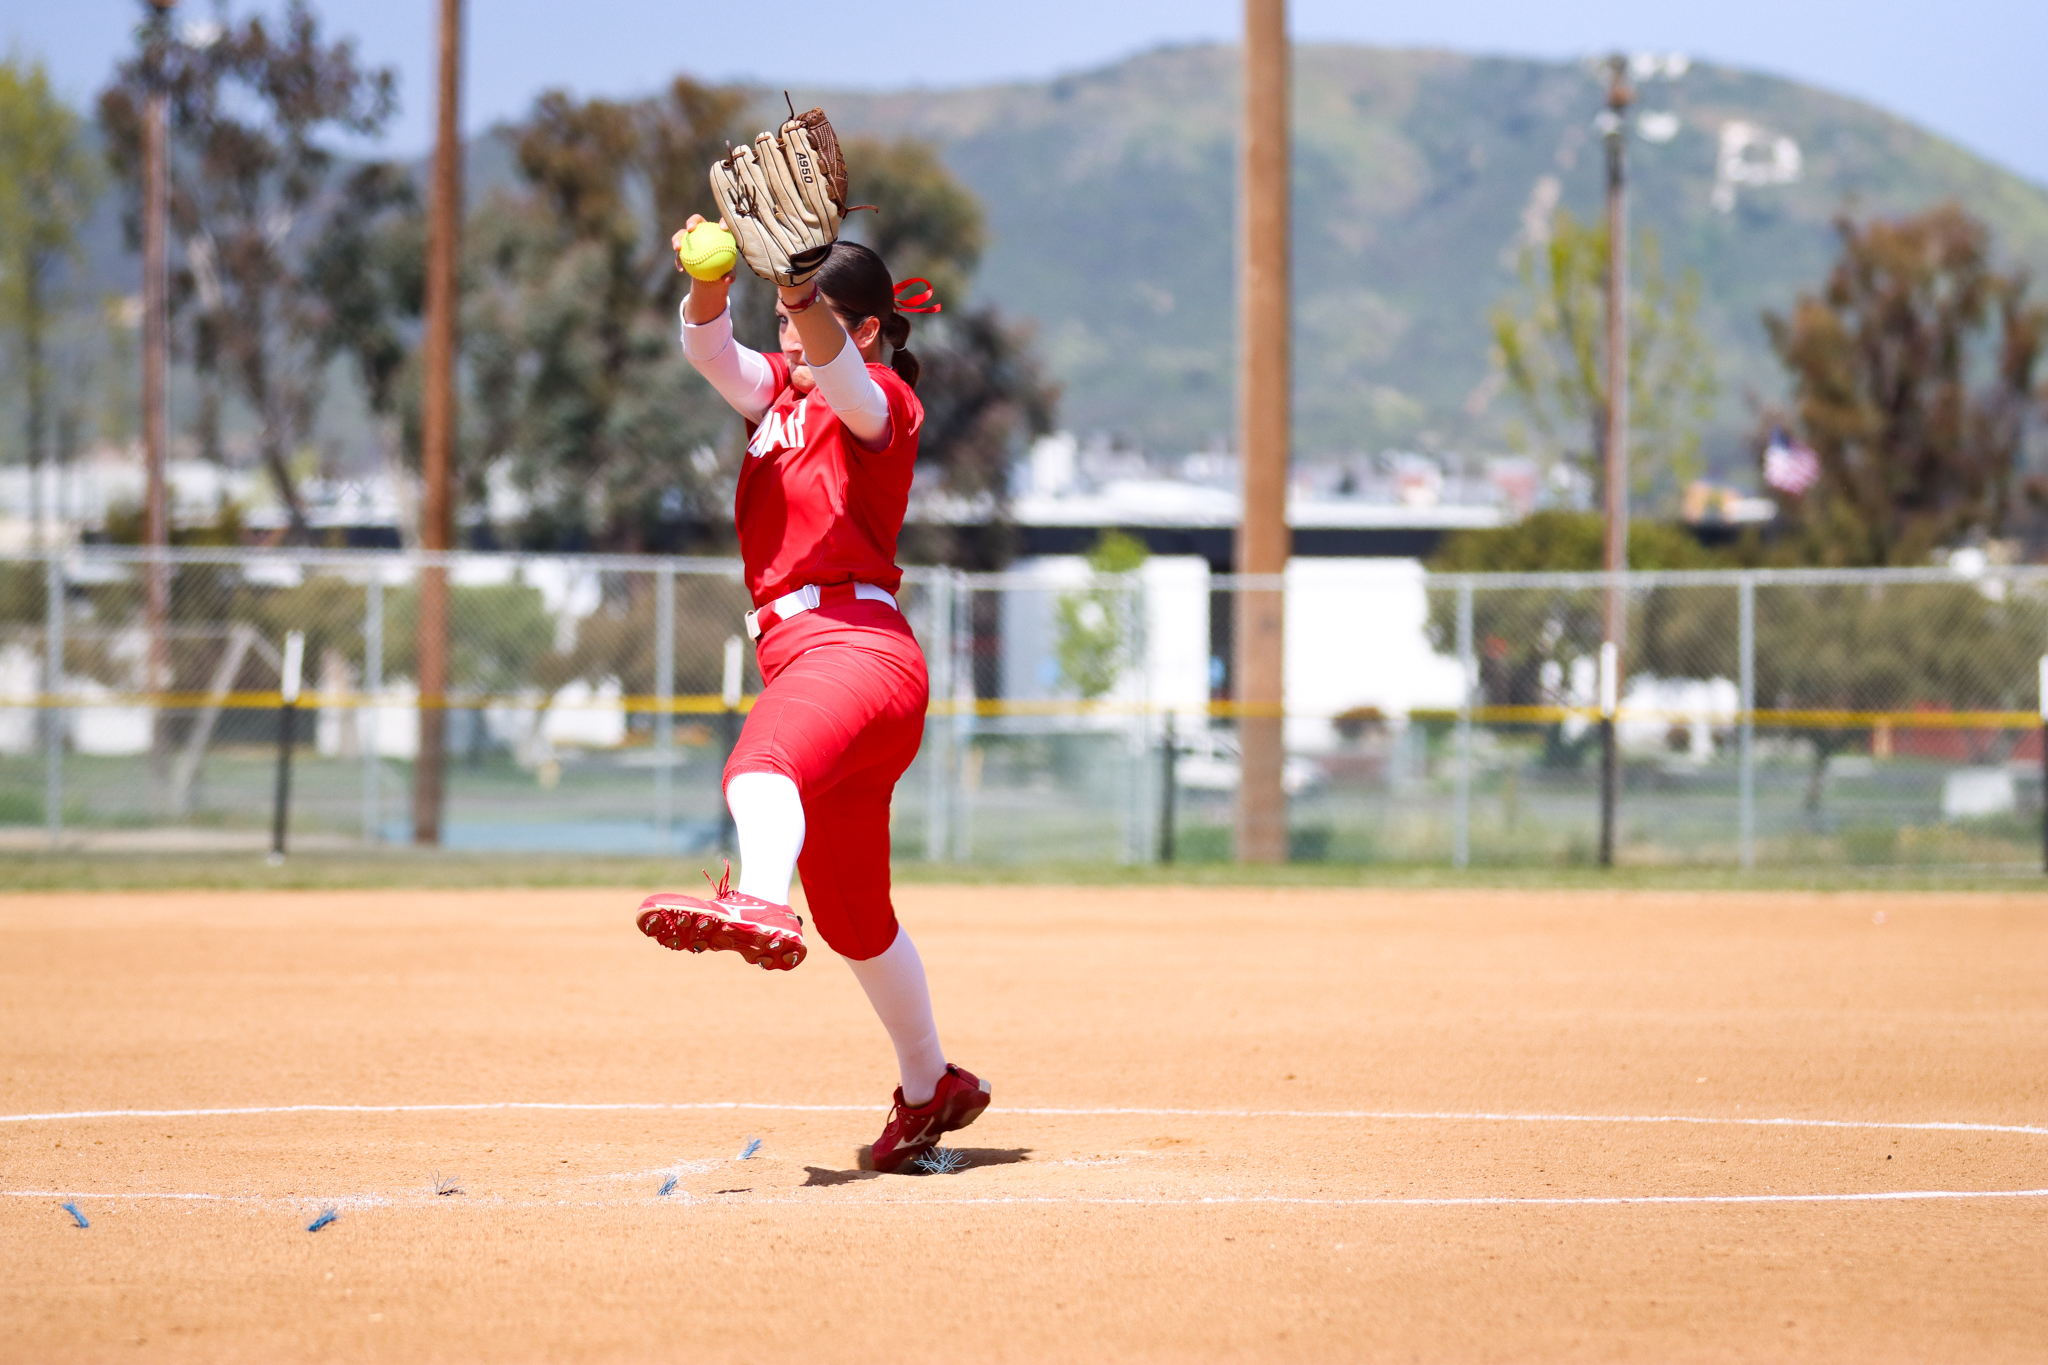 India Caldwell recorded her first career perfect game. Photo by Cara Heise.